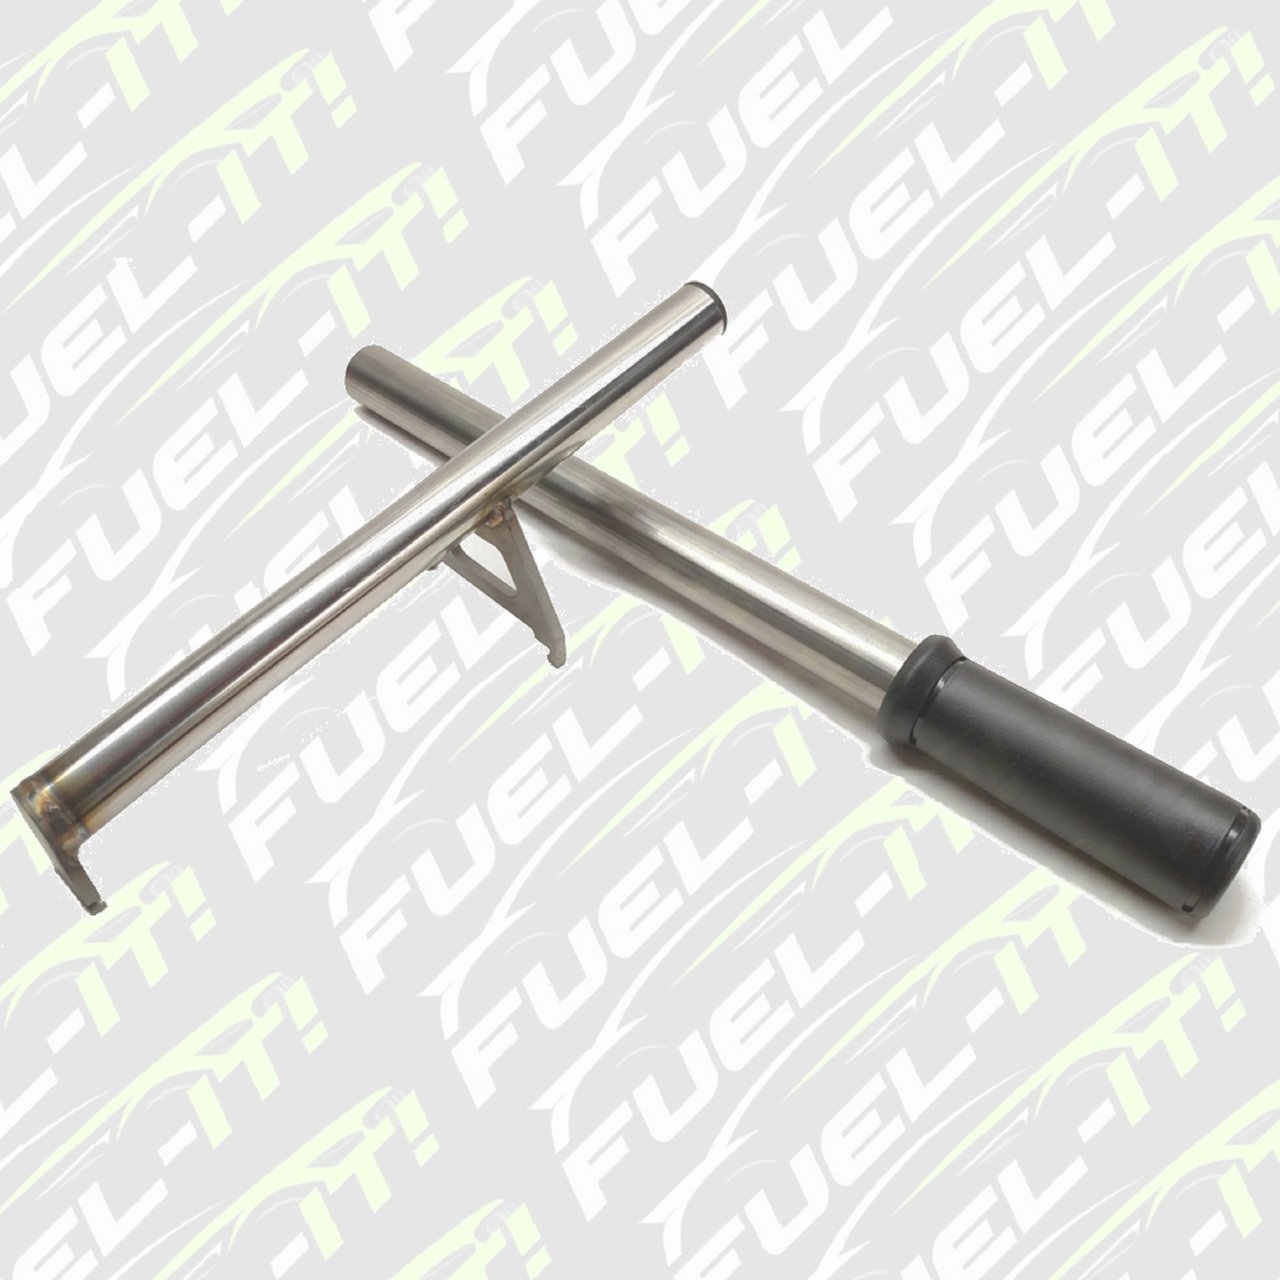 Fuel-It Fuel Pump Lock Ring Removal Tool for BMW/MINI - 0